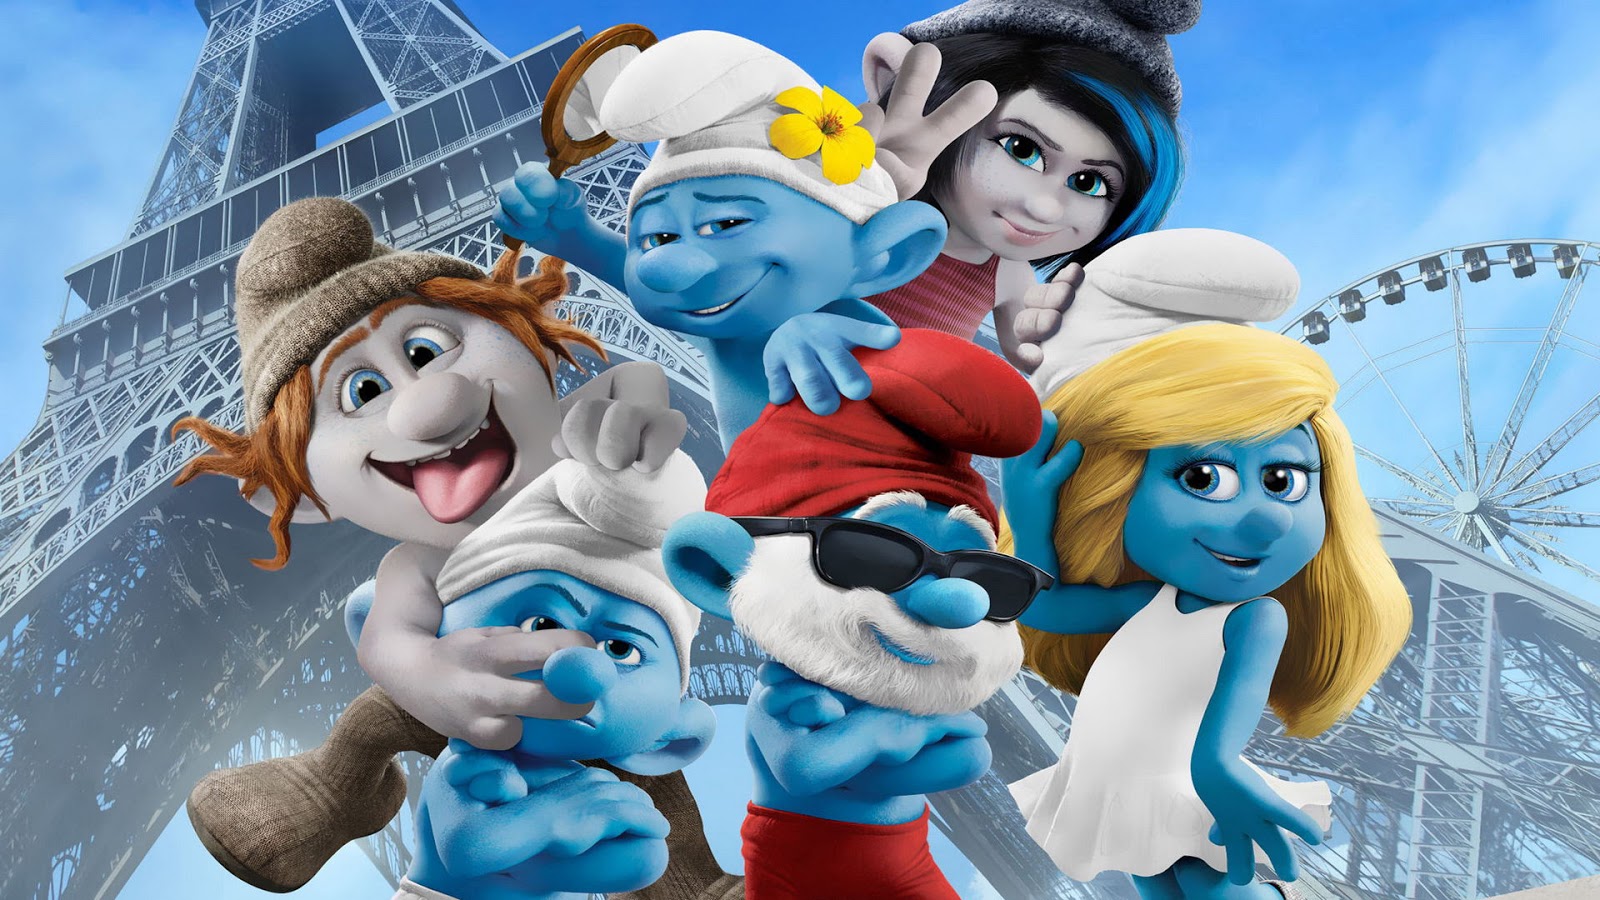 The Smurfs Movie 3D HD Poster Wallpapers Download Free Wallpapers in ...